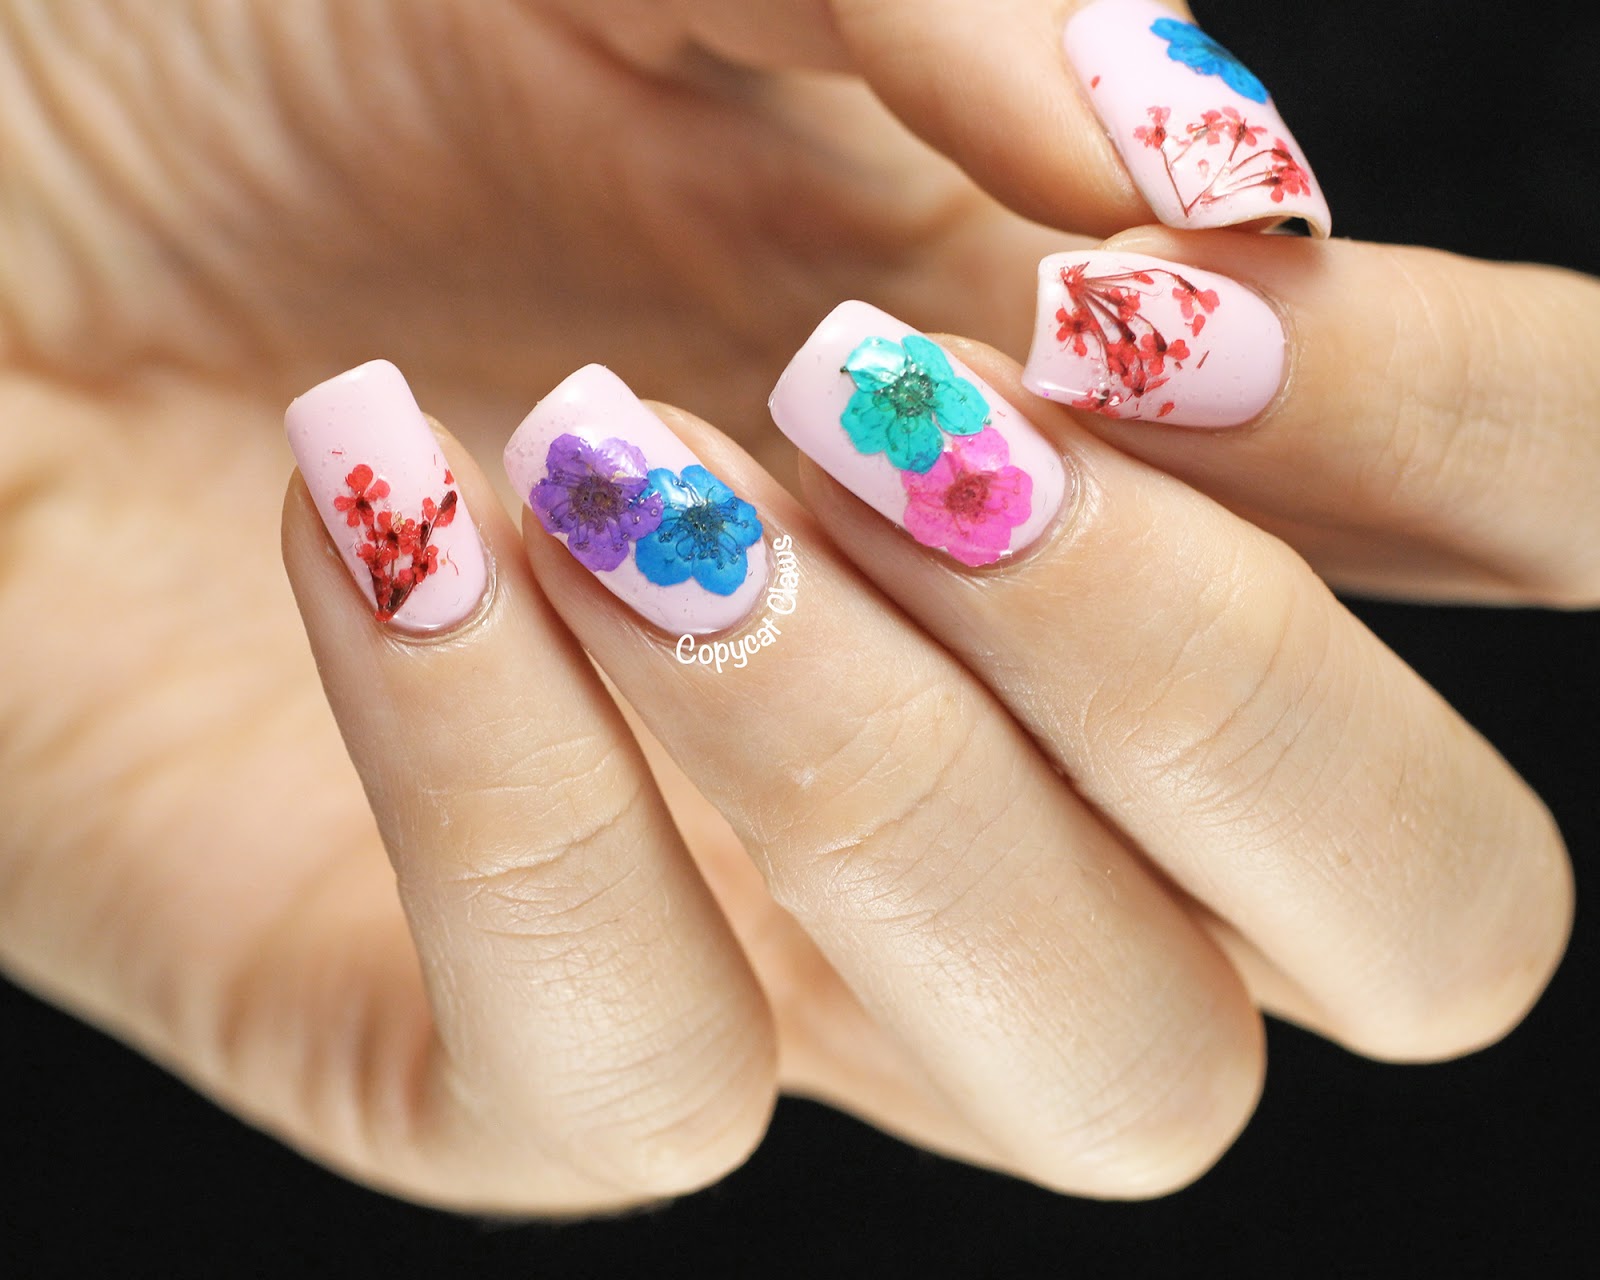 2. 10 Best Dried Flowers for Nail Art - wide 10